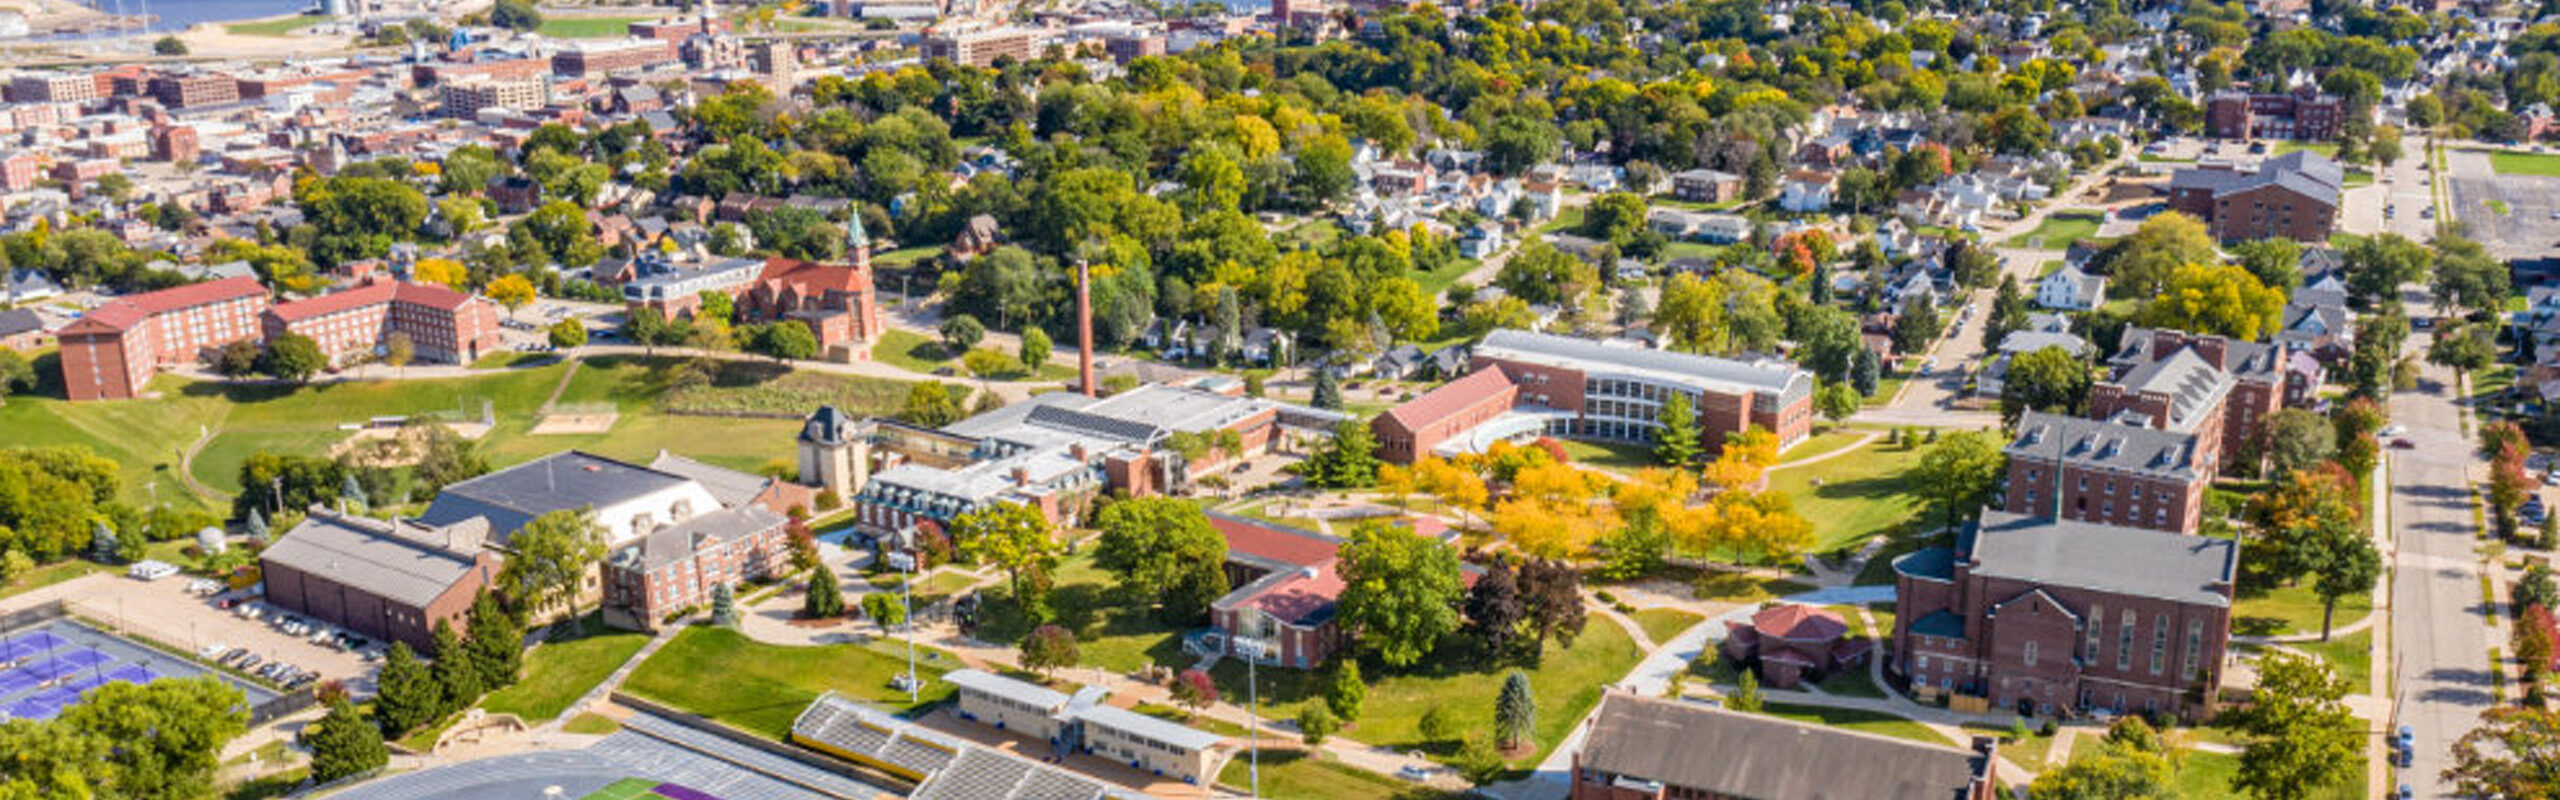 Loras College drone view from above during summer